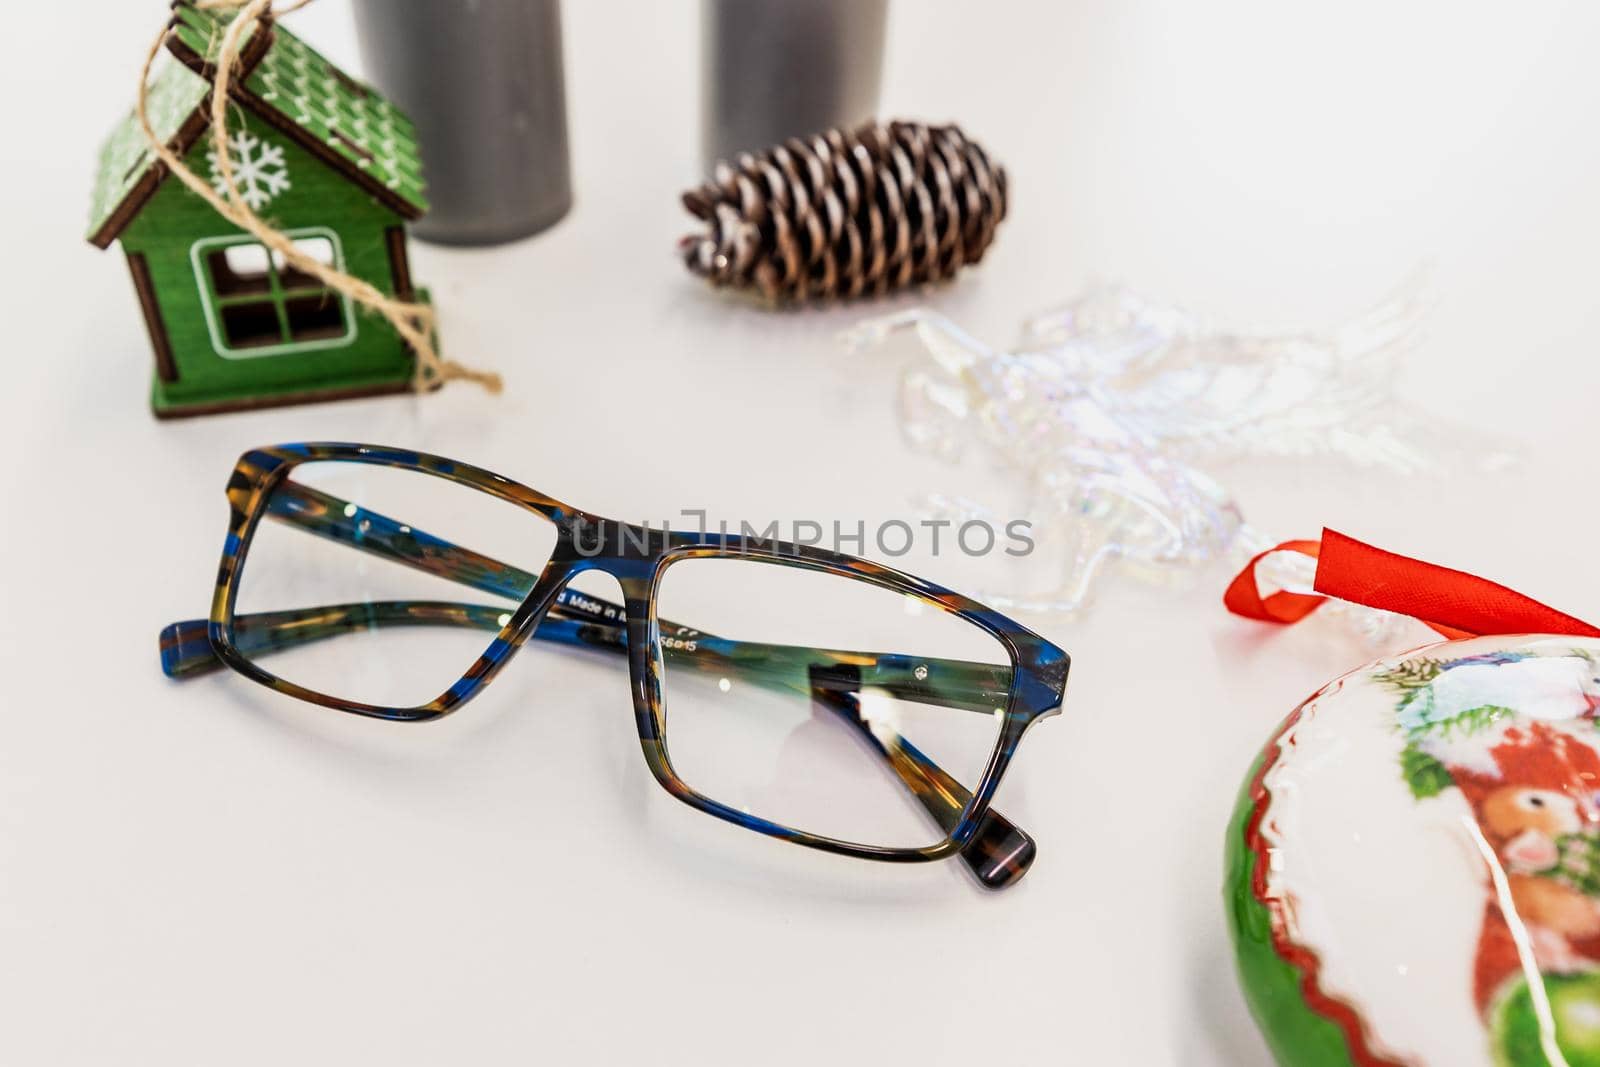 Glasses on a white table surrounded by accessories by wip3out